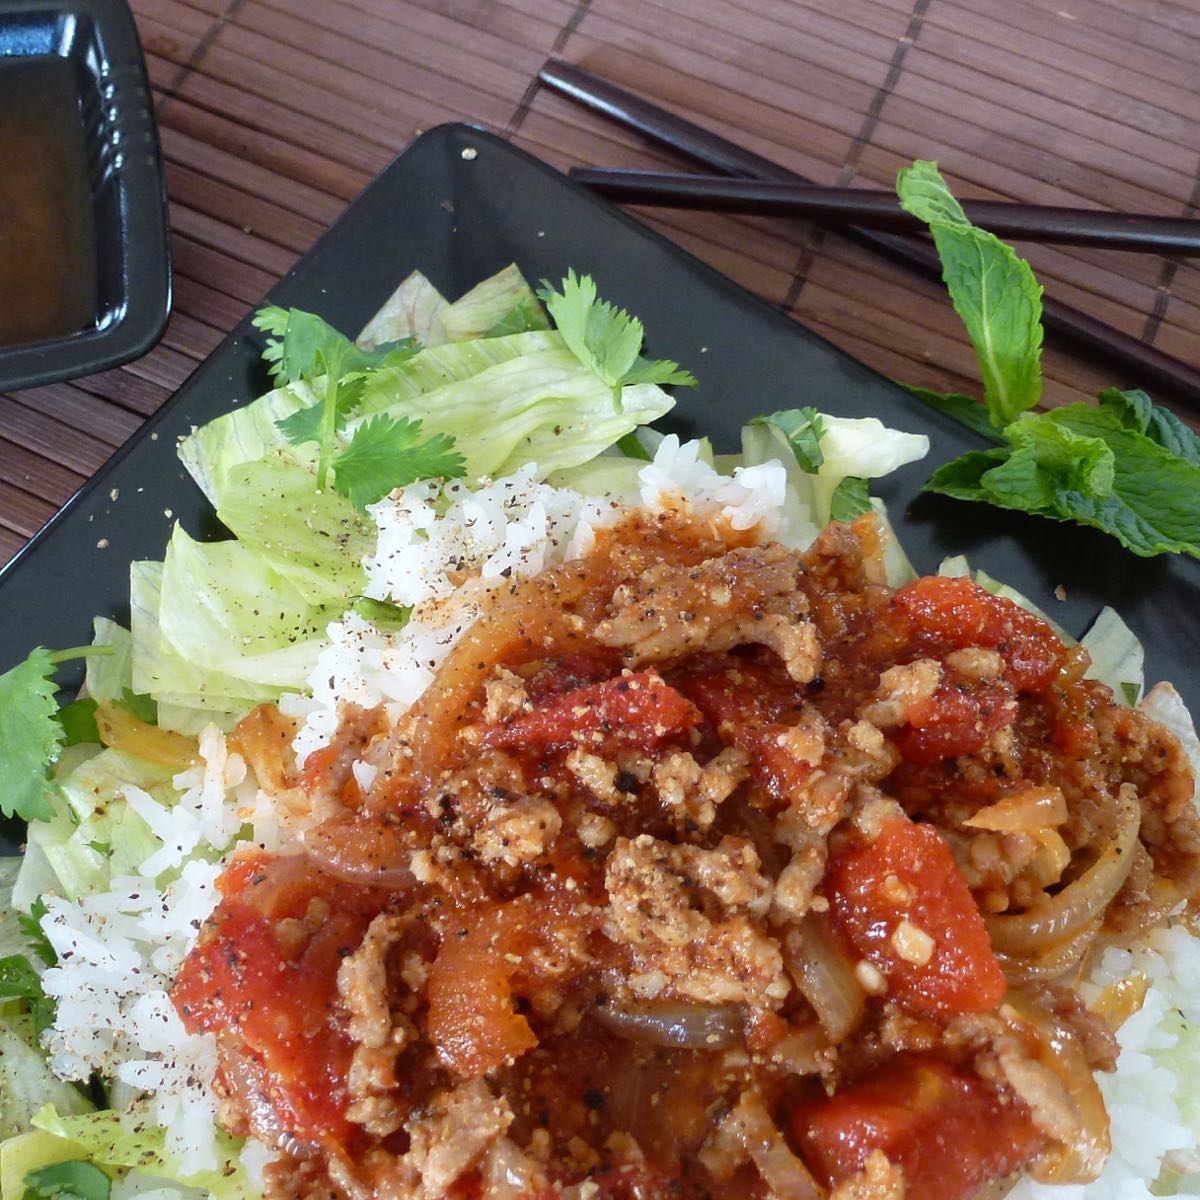 A square black plate with a bottom layer of lettuce and fresh herbs, covered with warm rice and topped with Vietnamese Pork in Tomato Sauce. A small black dish with nuoc cham beside it.